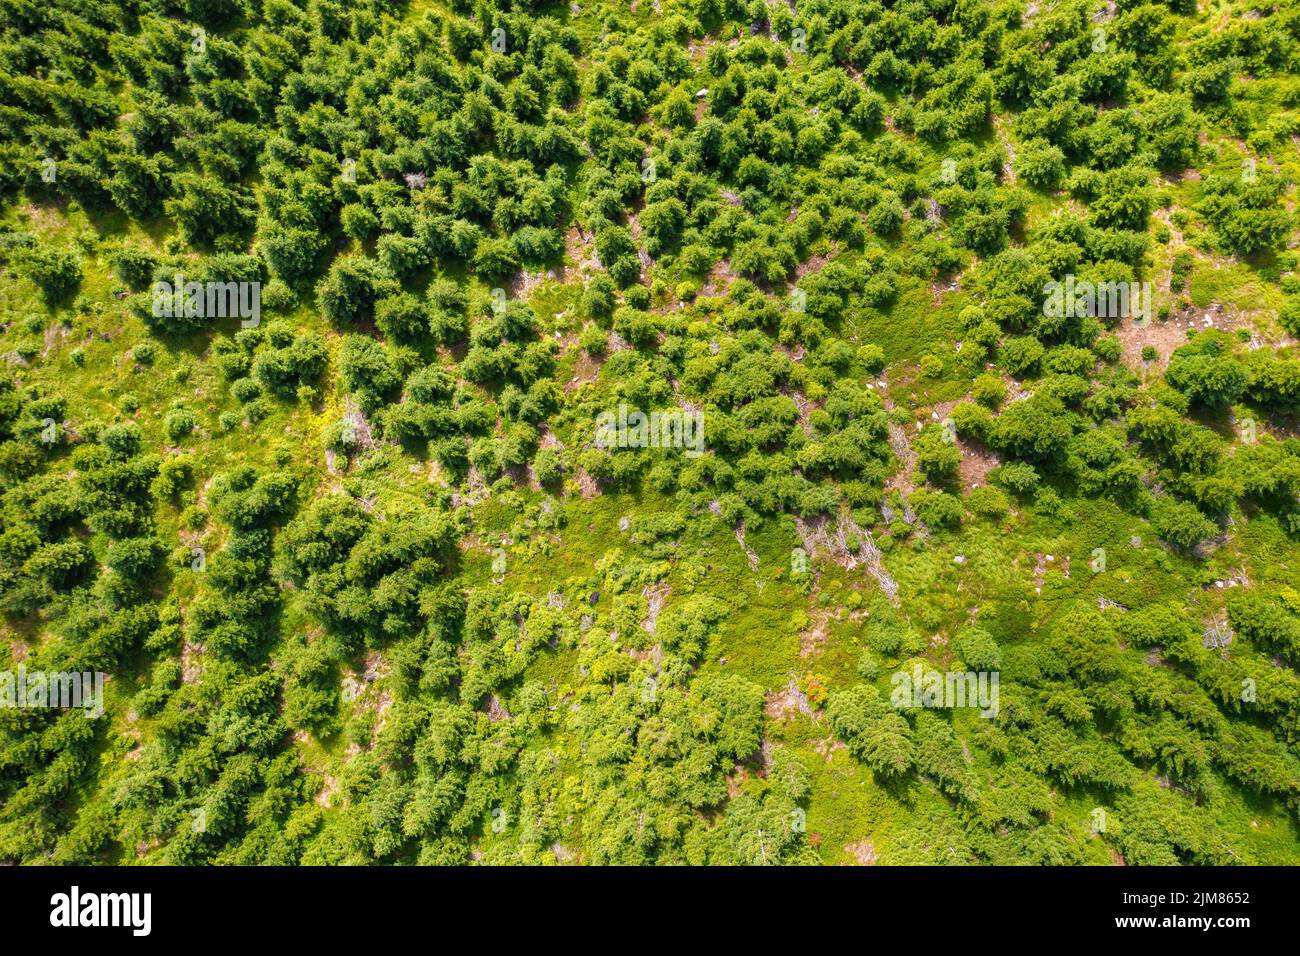 Top view of the top of green pine or spruce trees in the forest in sunny summer day. Healthy environment concept in period of climate change concept. Stock Photo